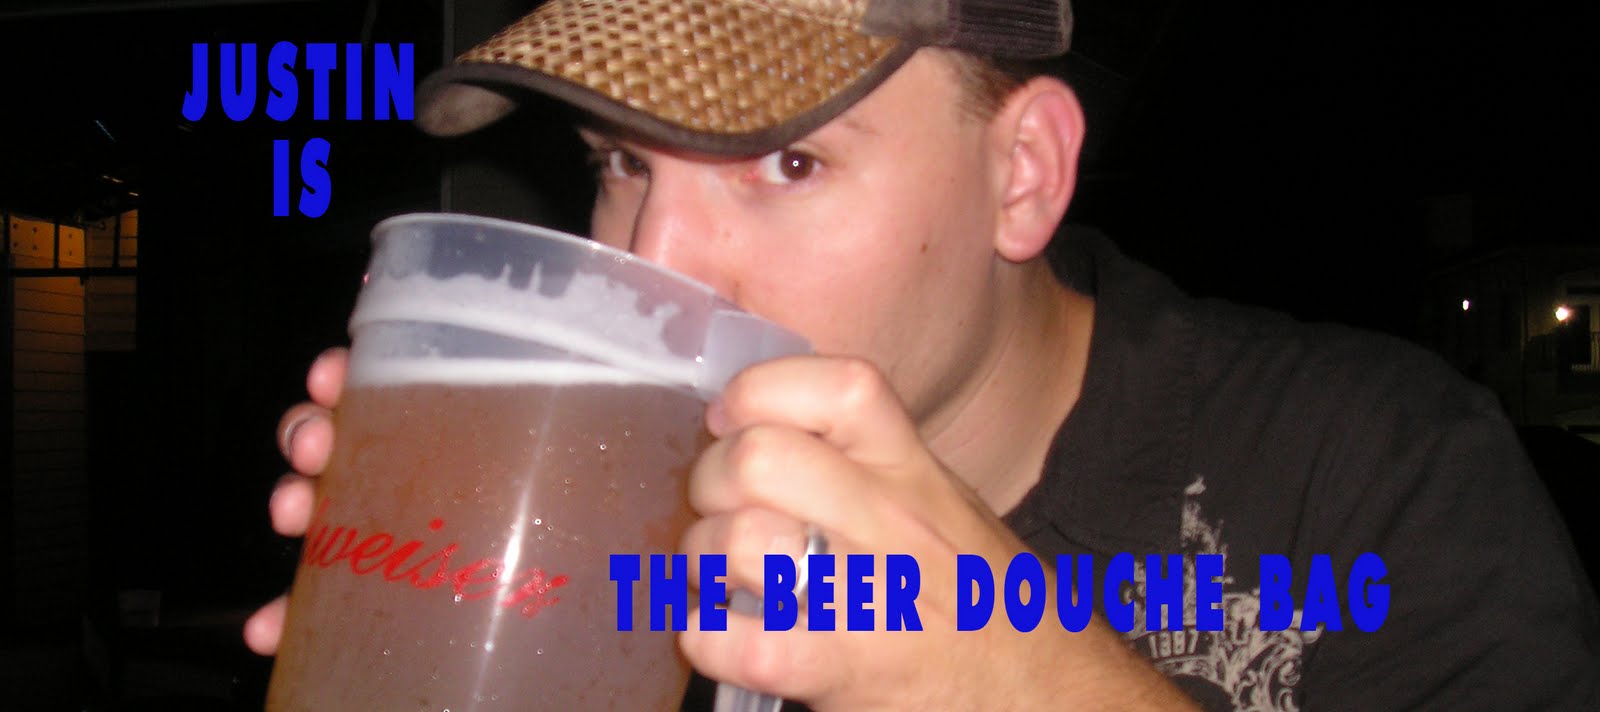 Justin is the Beer Douchebag